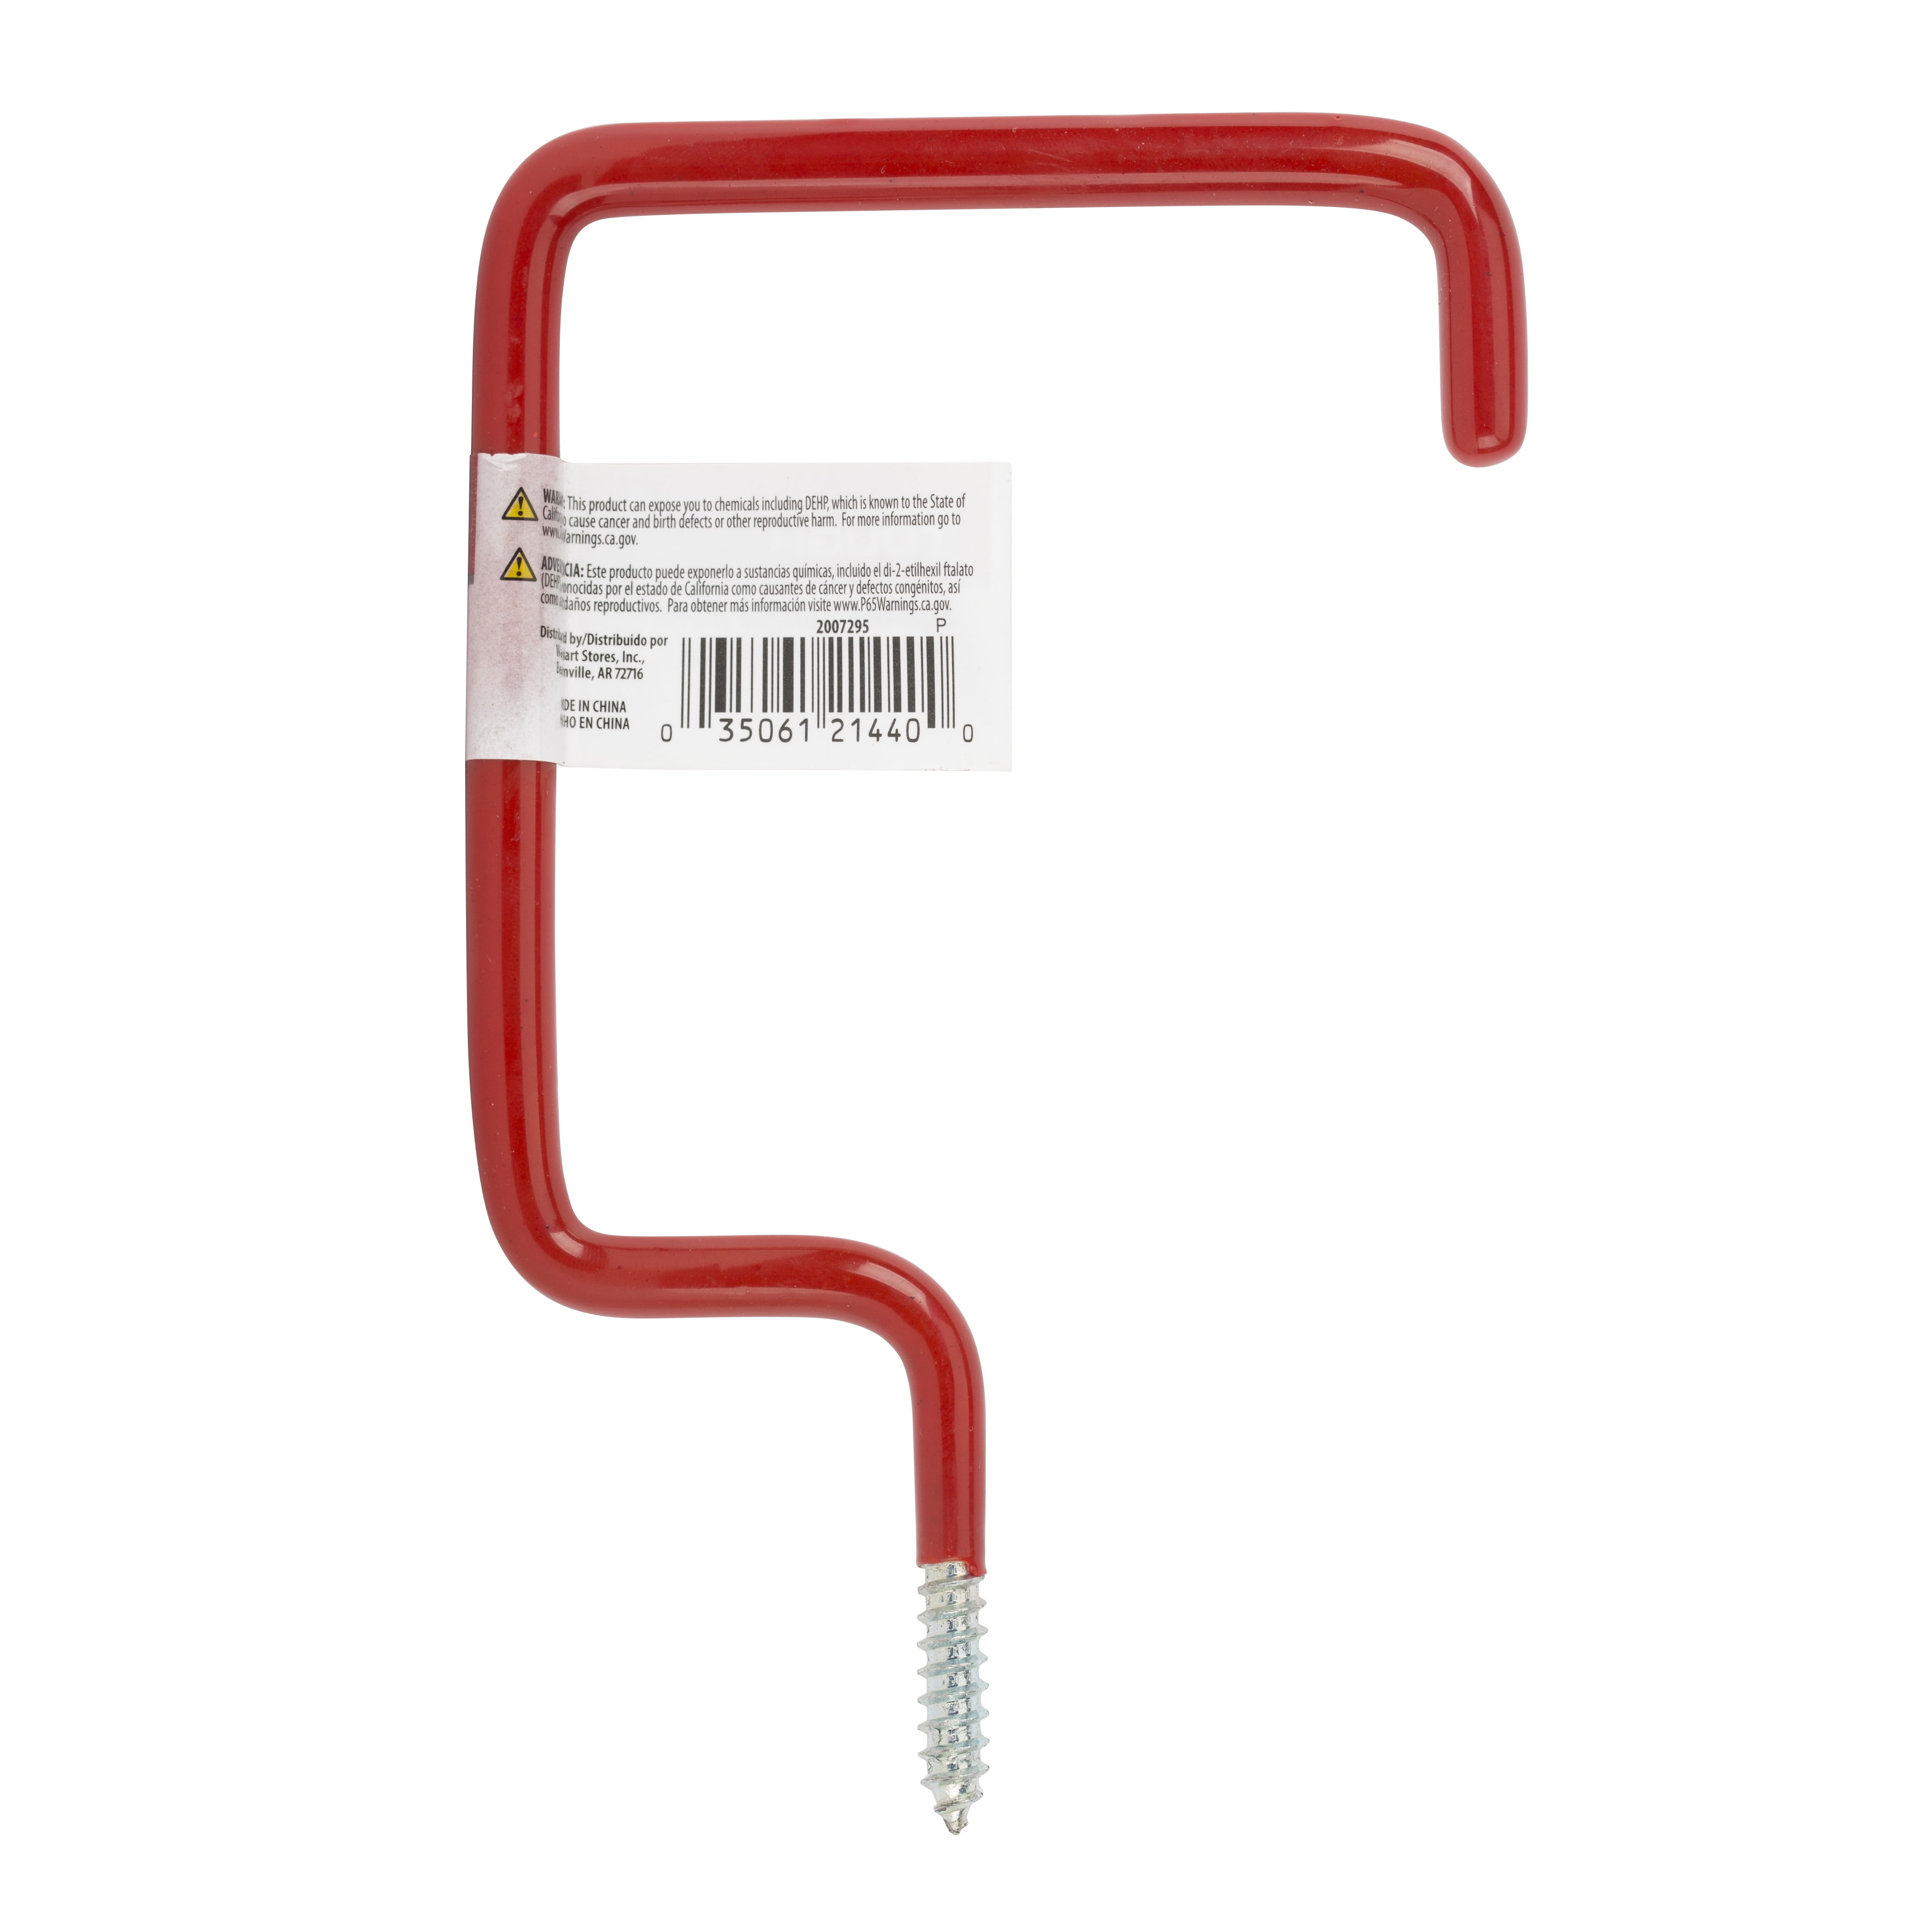 Screw-In Vinyl Coated Red Storage Hook (2-Pack) - Gillman Home Center